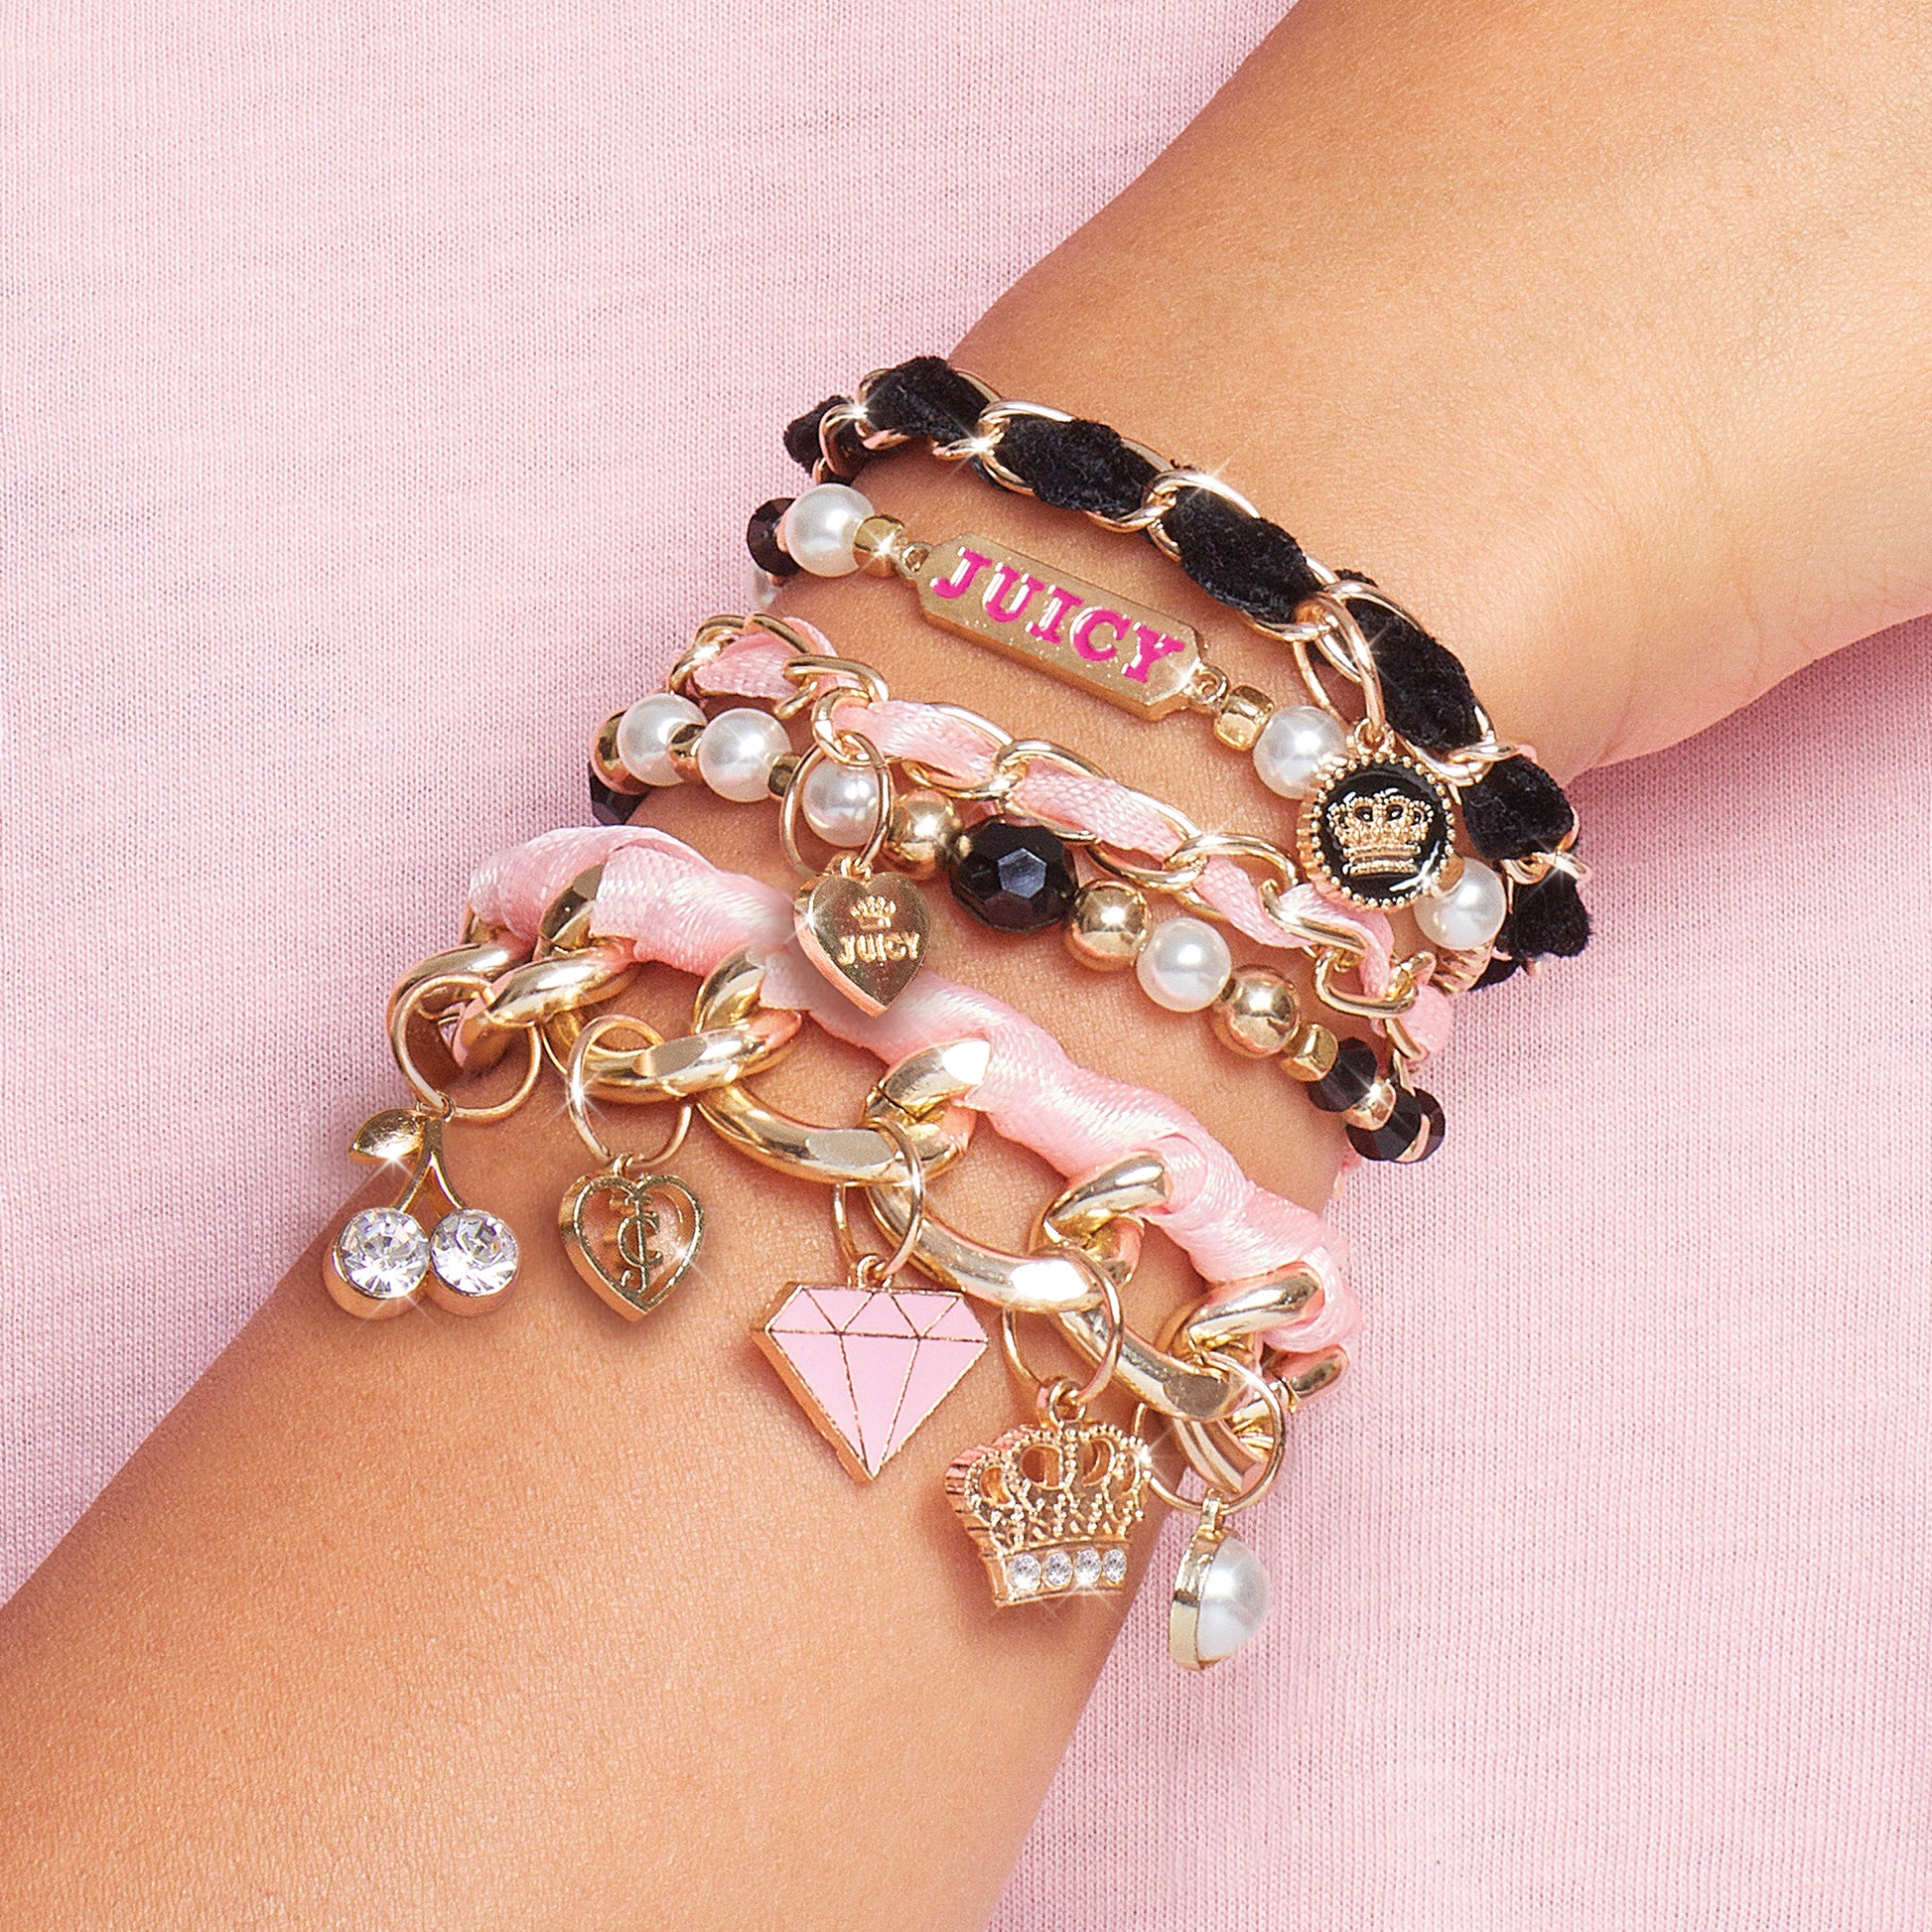 Make It Real – Juicy Couture Chains & Charms. DIY Charm Bracelet Making Kit  for Girls 